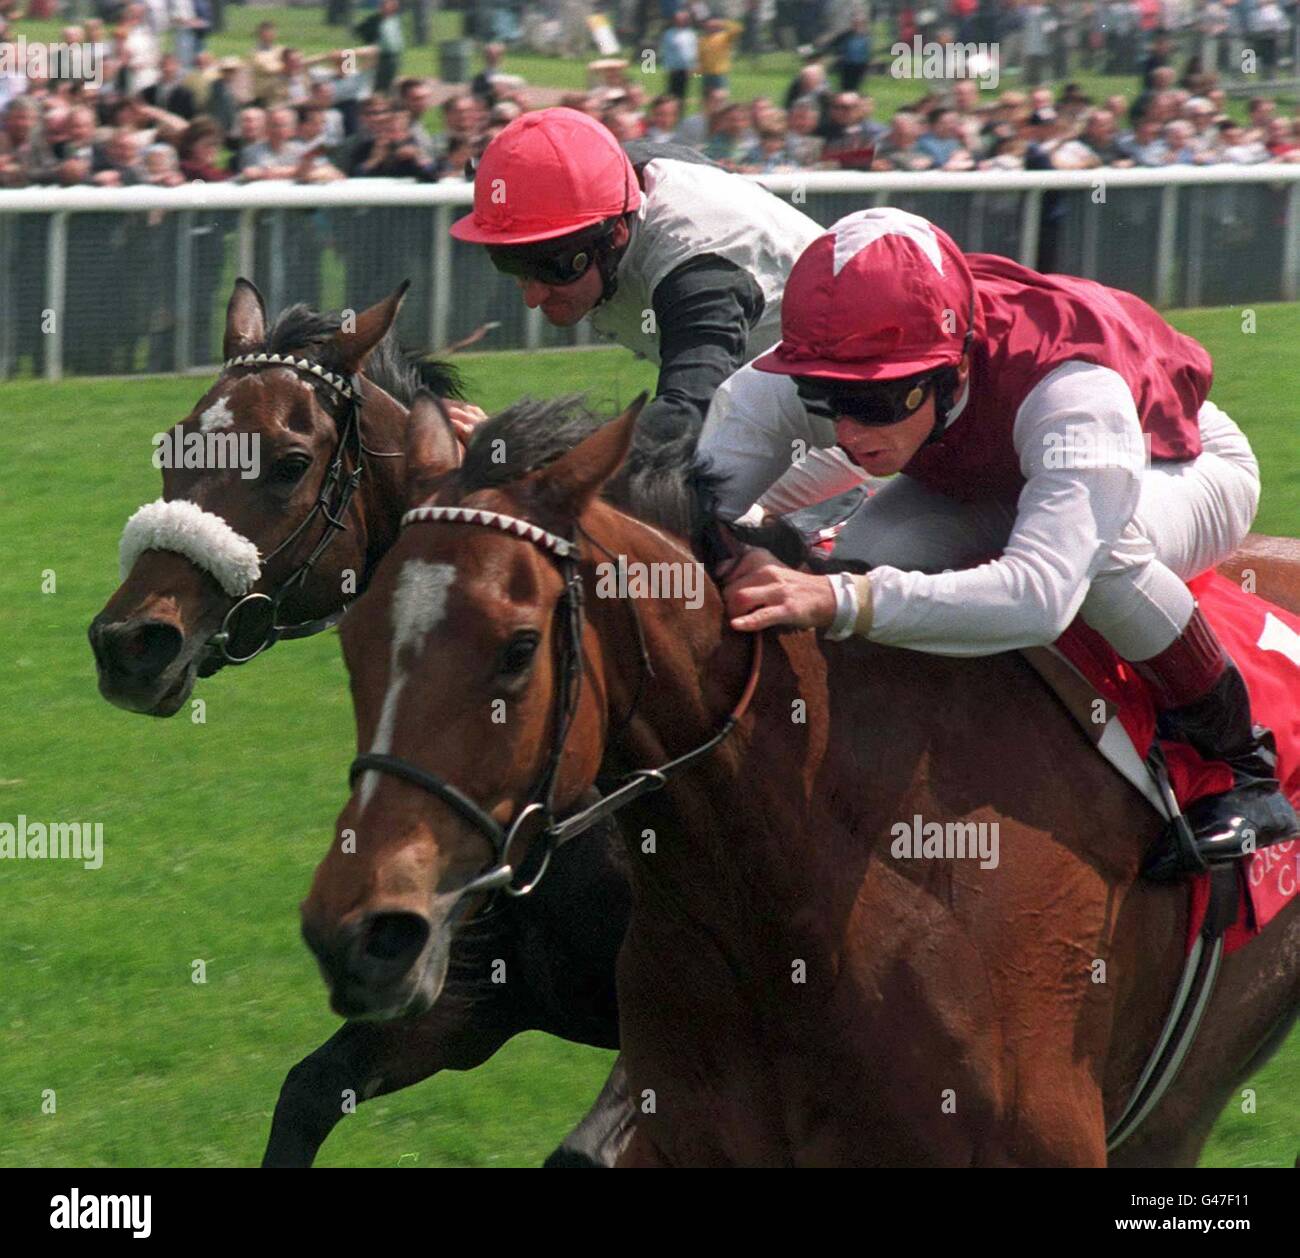 Frankie Dettori(rt) on Papering gets home ahead of Charlotte Corday and Michael Hills to win the Grosvenor Casinos Middleton Stakes at York Races today(Weds).Photo John Giles.PA. Stock Photo